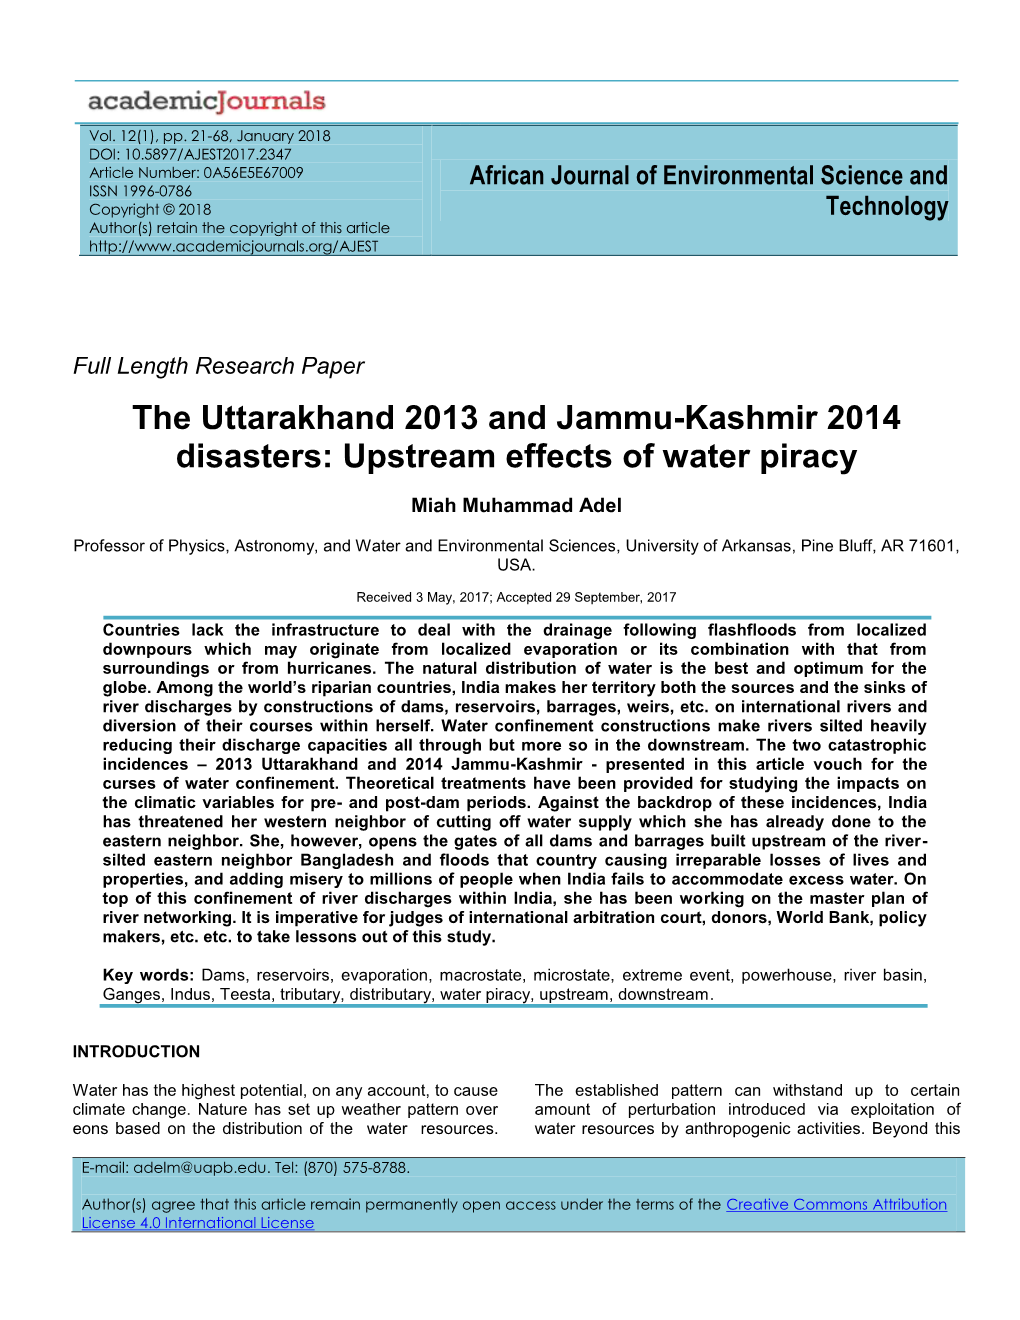 The Uttarakhand 2013 and Jammu-Kashmir 2014 Disasters: Upstream Effects of Water Piracy